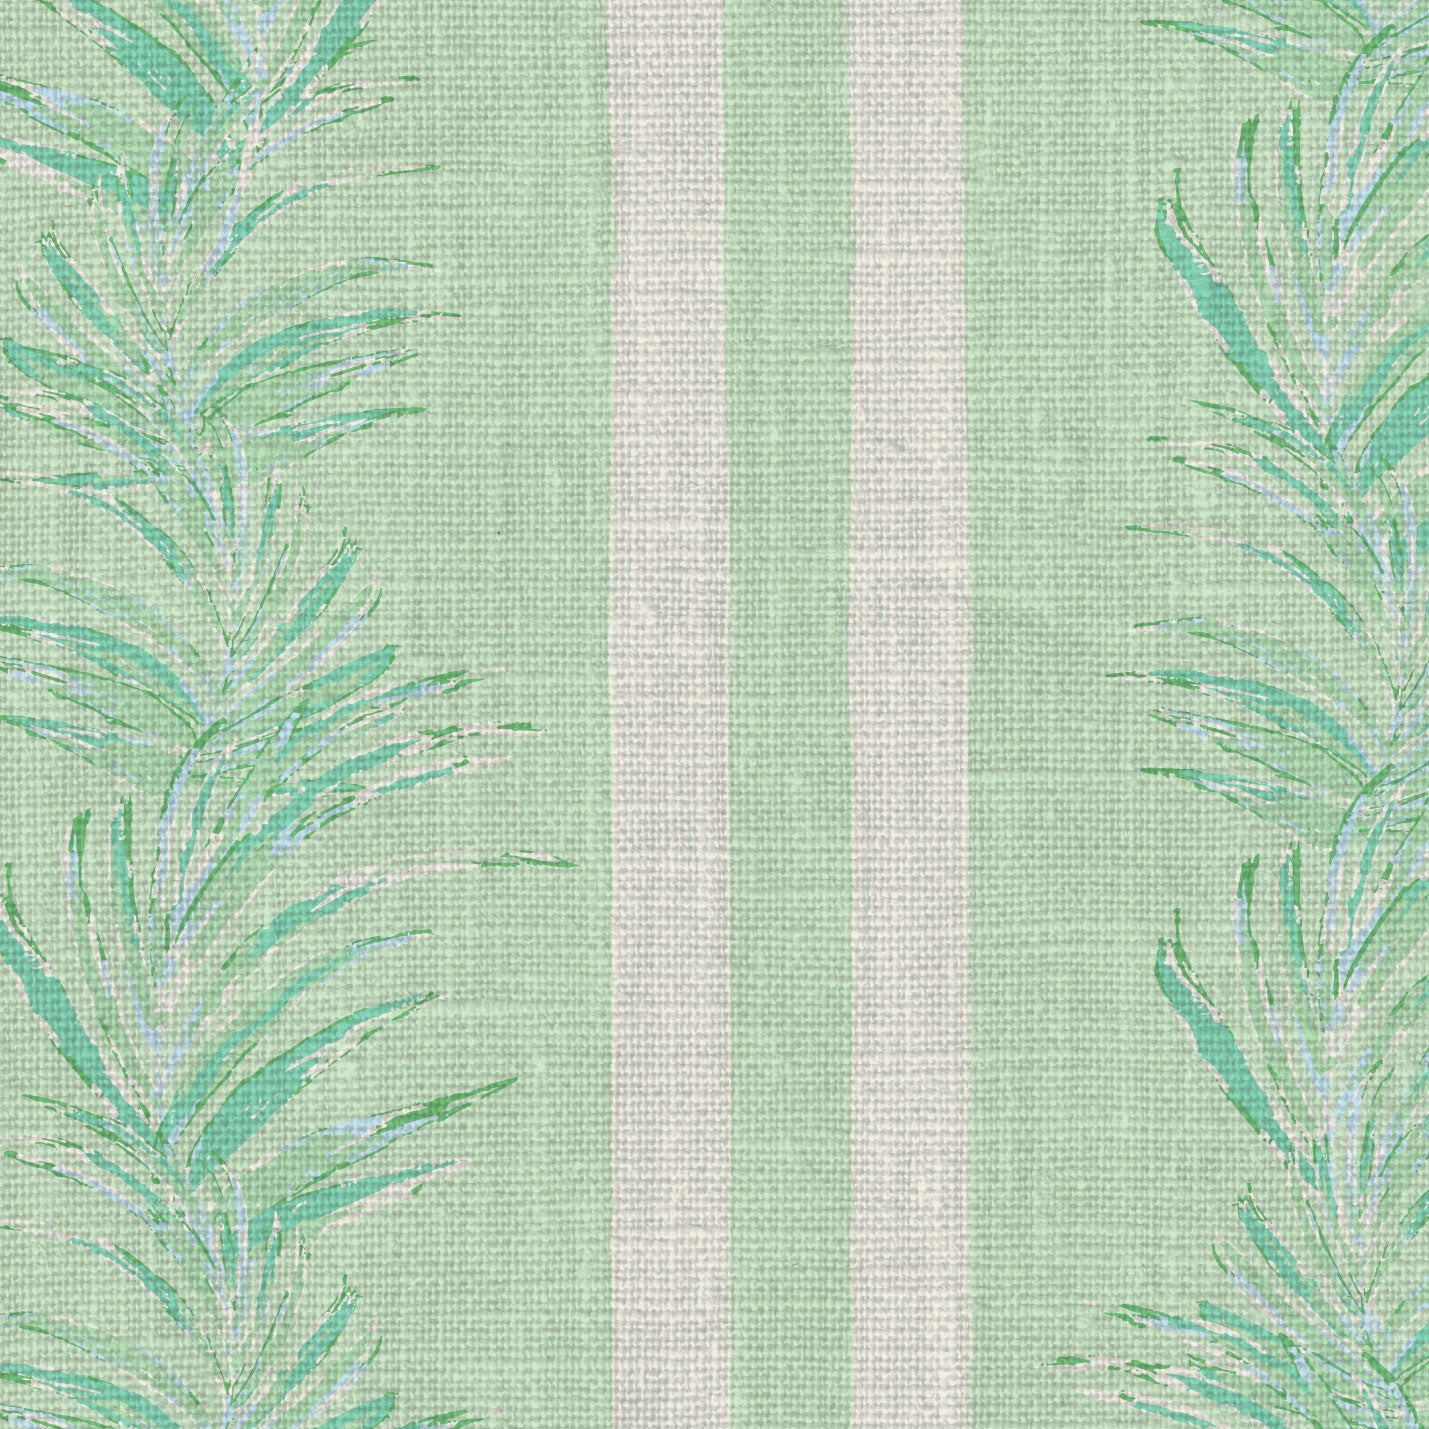 wallpaper Natural Textured Eco-Friendly Non-toxic High-quality Sustainable Interior Design Bold Custom Tailor-made Retro chic Grand millennial Maximalism Traditional Dopamine decor Tropical Jungle Coastal Garden Seaside Seashore Waterfront Vacation home styling Retreat Relaxed beach vibes Beach cottage Shoreline Oceanfront Nautical Cabana preppy Cottage core Countryside Vintage vertical stripe cabana leaf palm green mint white linen